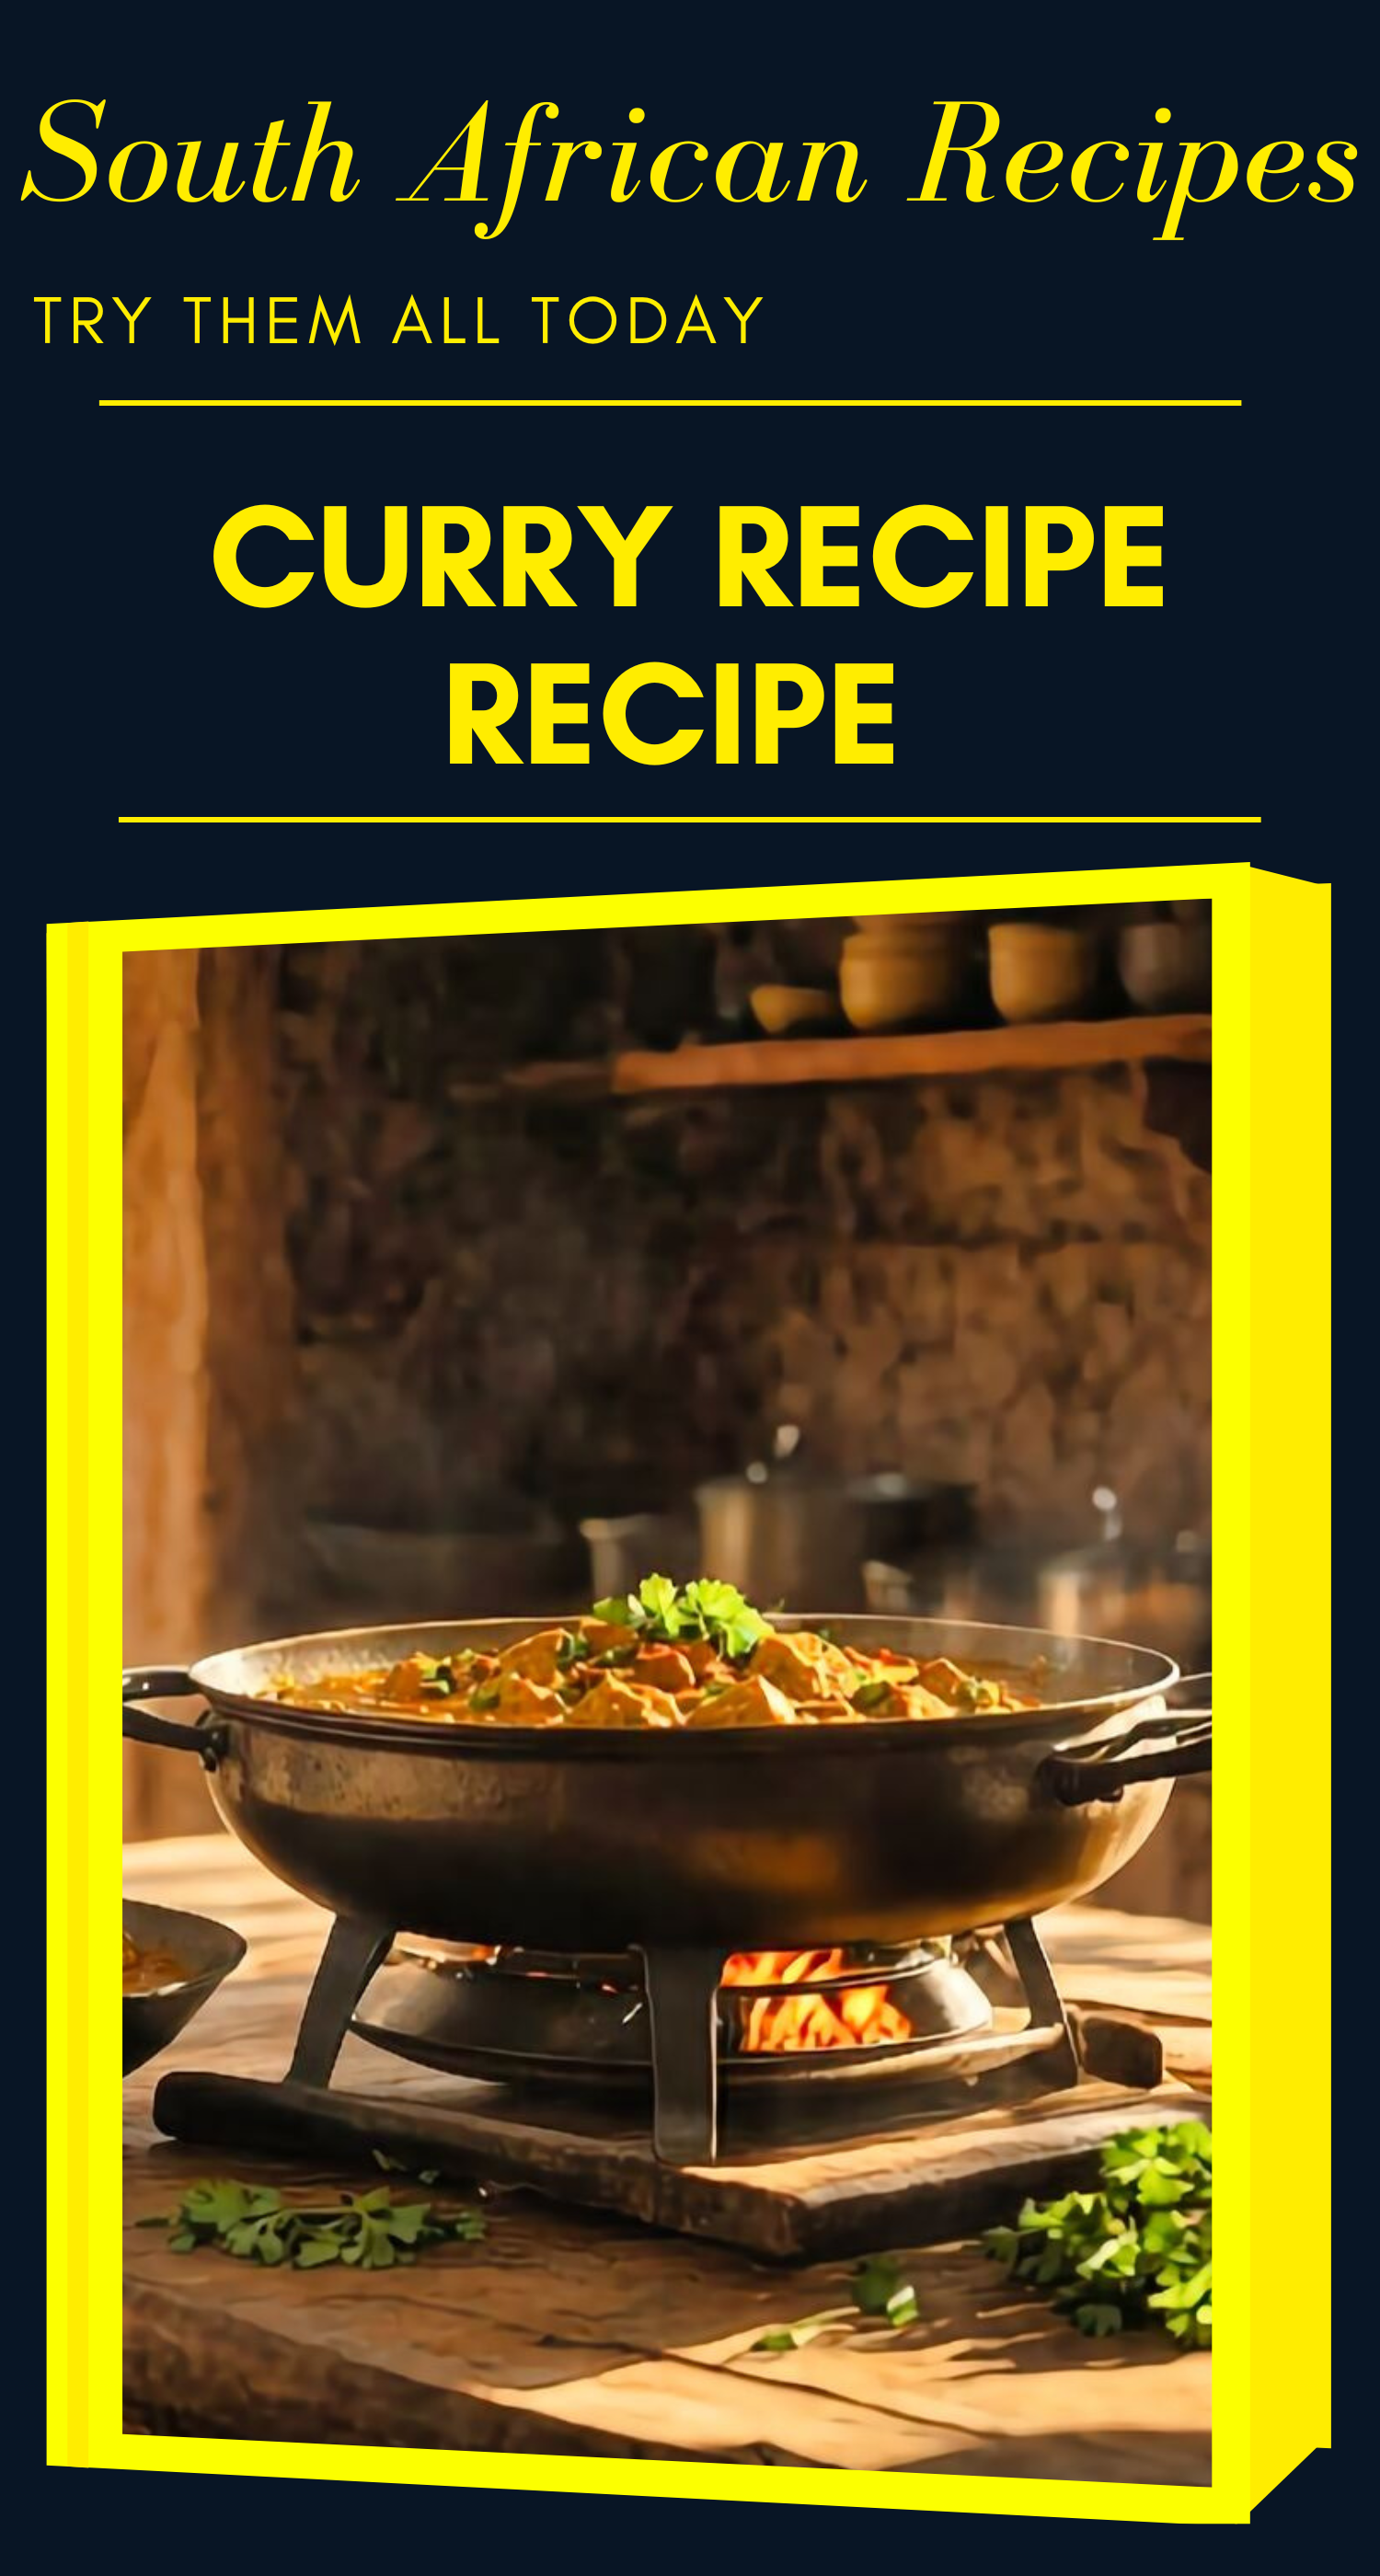 South African Chicken Curry Recipe